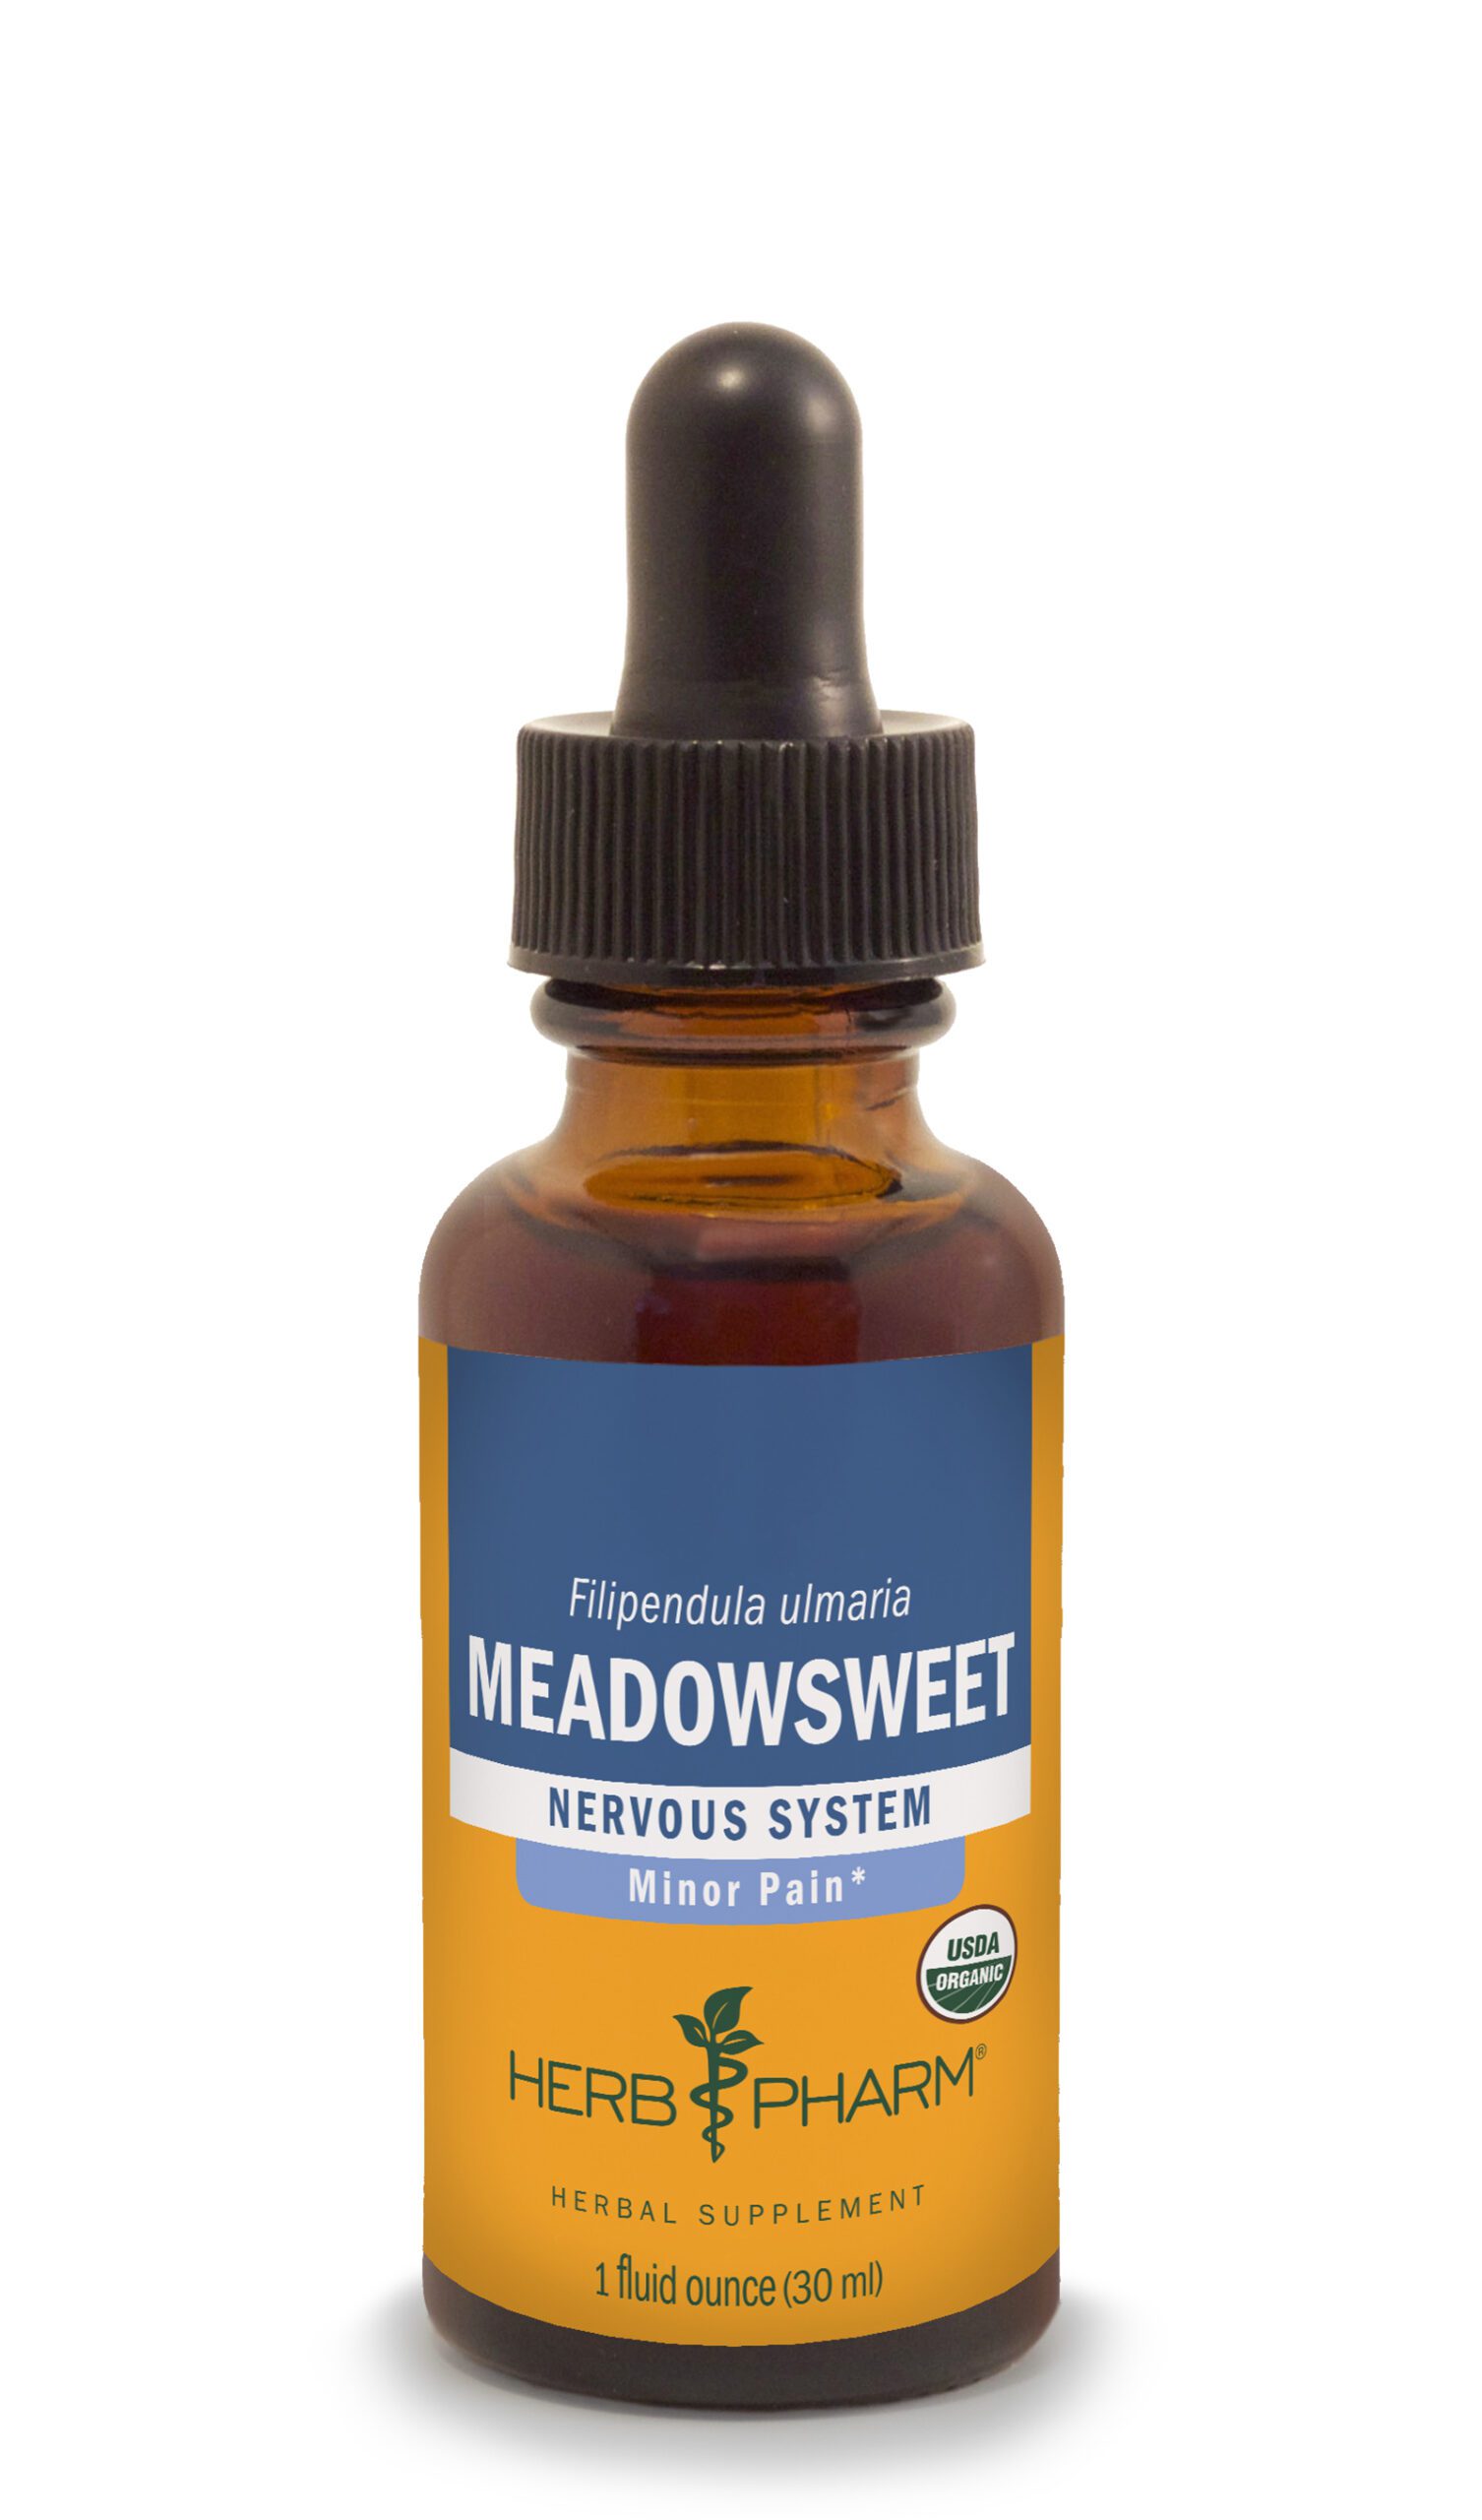 Product Listing Image for Herb Pharm Meadowsweet Tincture 1oz